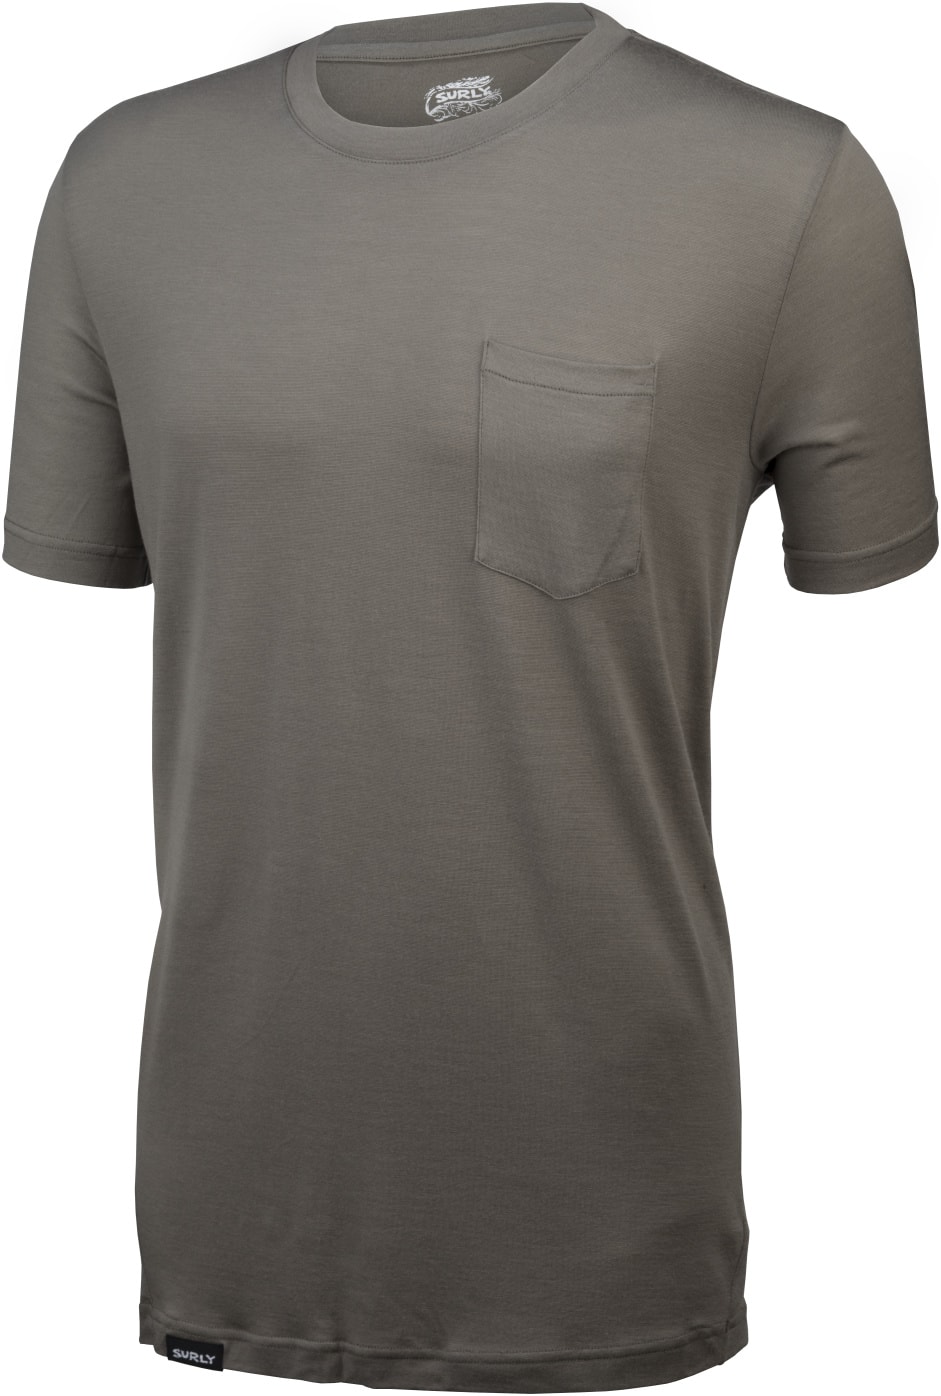 Surly Wool Pocket T - brown - front view